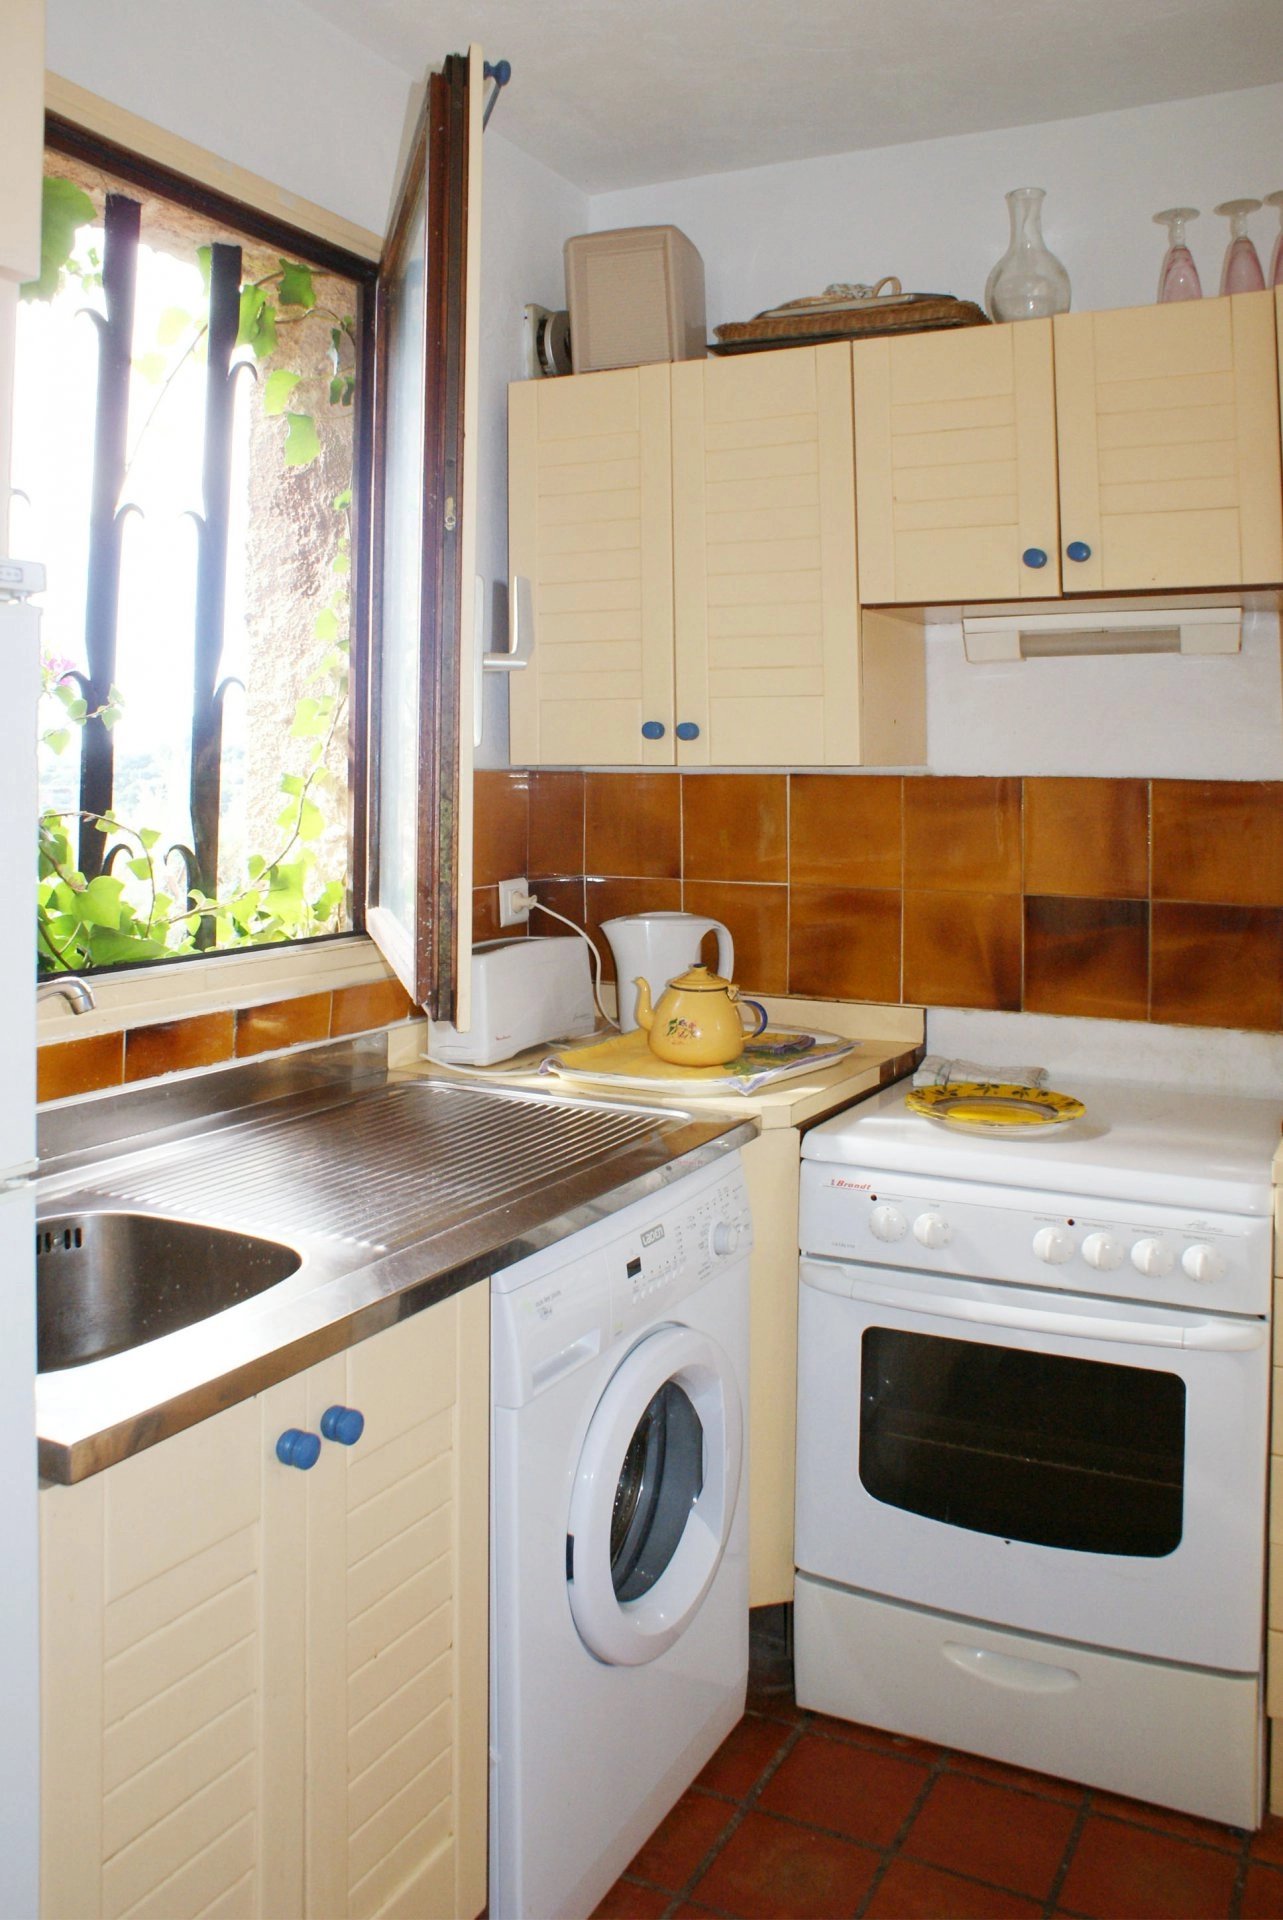 holiday house: Terraced house near the sea, 2 bed rooms (4 sleeps) large, terrace, sea view  * ME 10 *